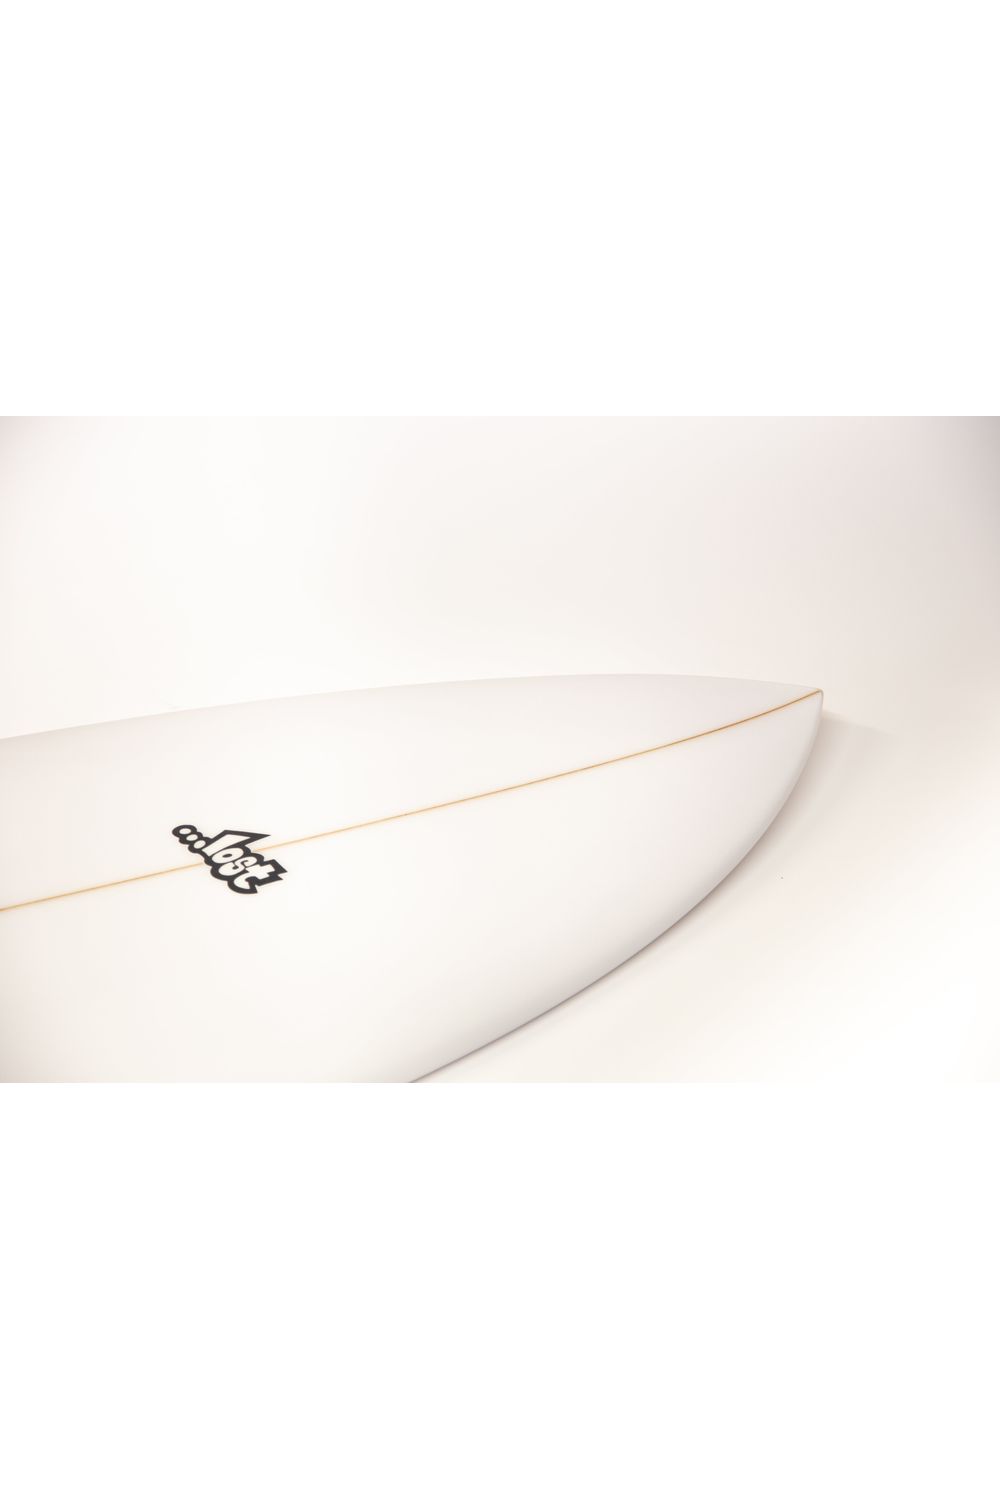 Lost Round Nose Fish 96, 5'10 Surfboard 33.50L PU Futures 3 Fins